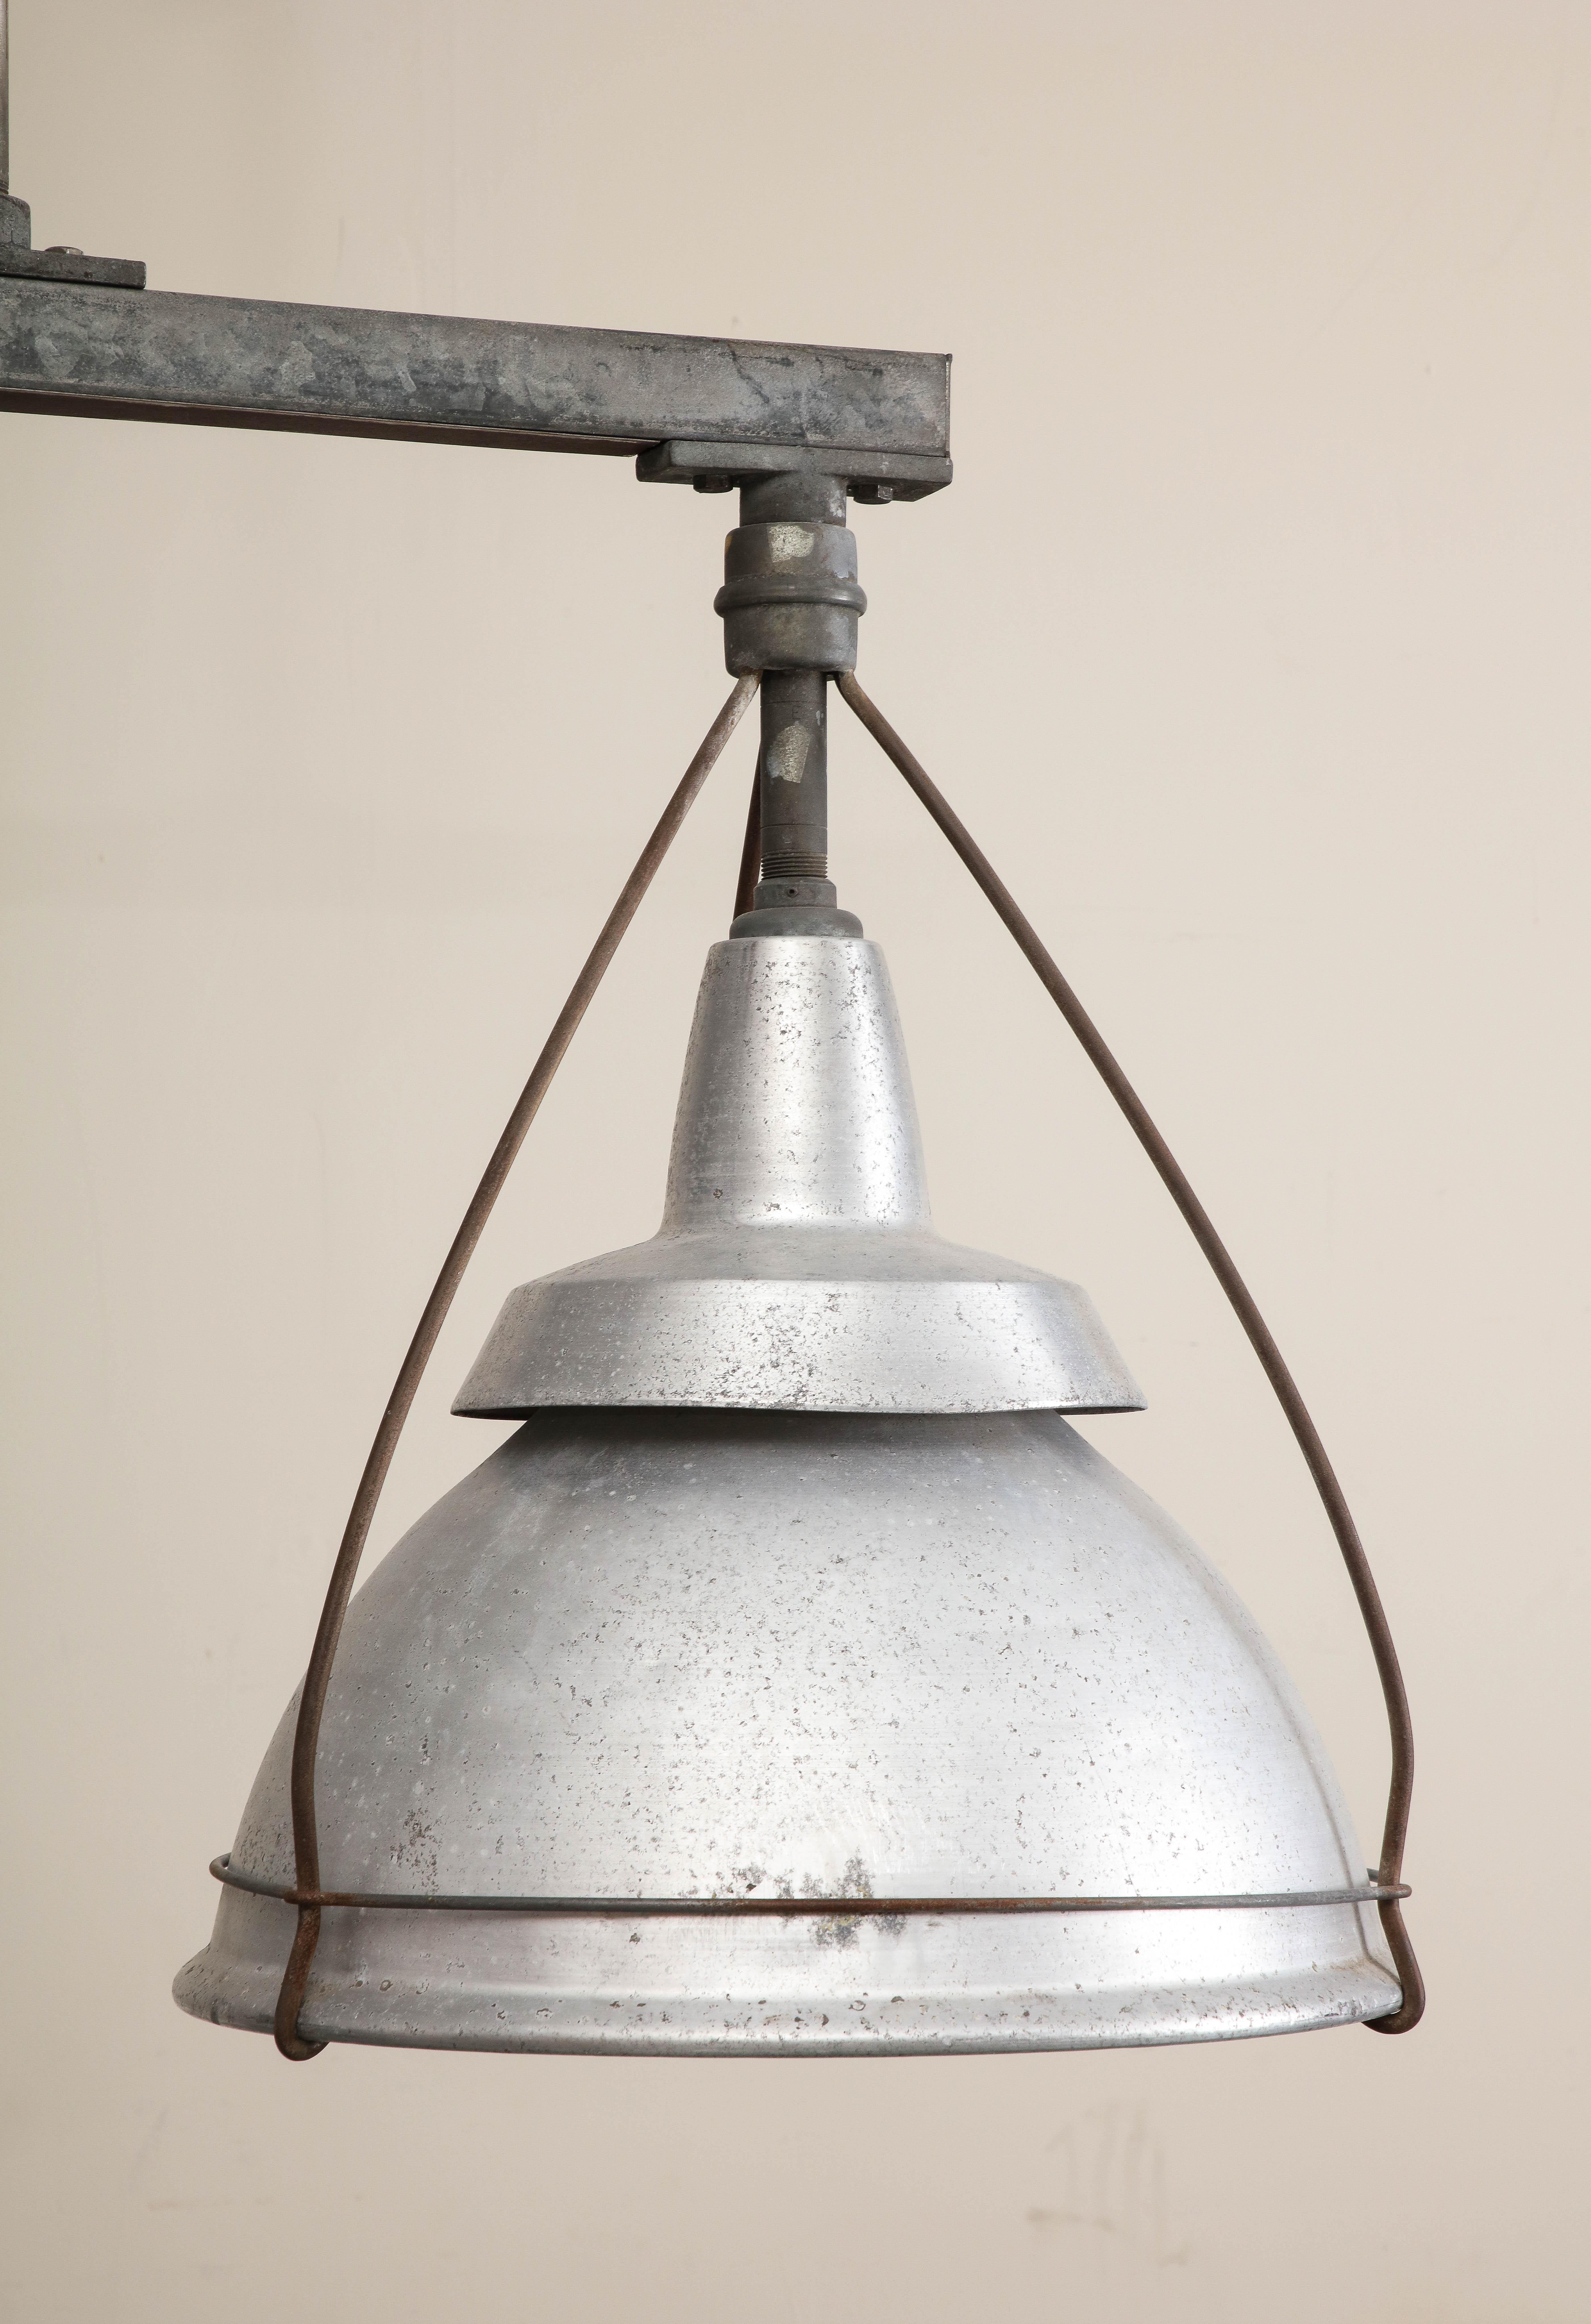 Large Ceiling-Mounted Industrial Double Pendant Light, C. 1920 For Sale 6